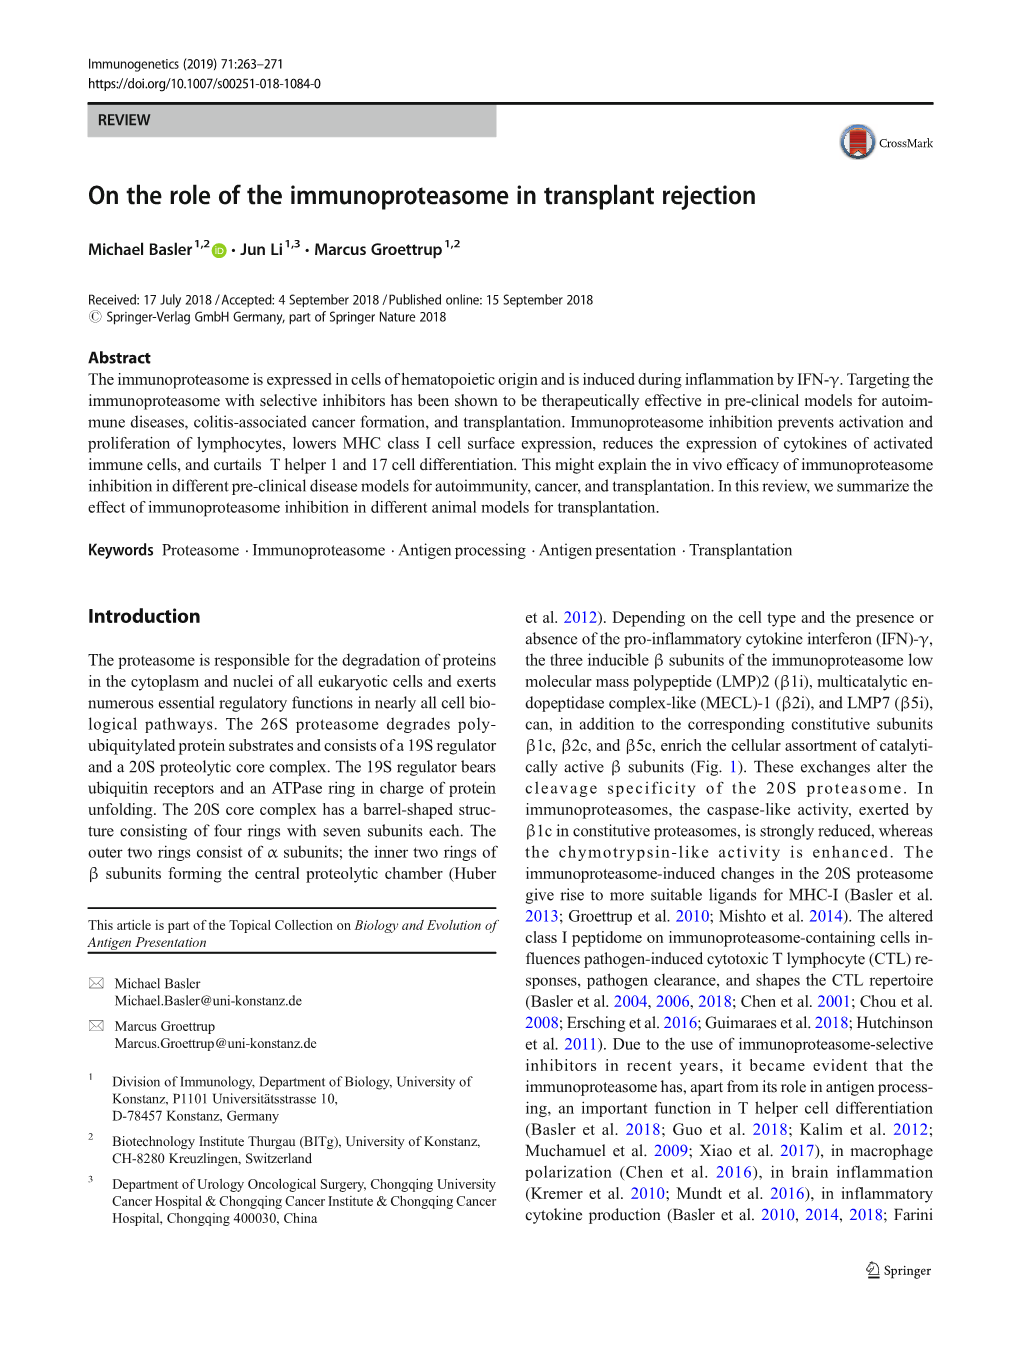 On the Role of the Immunoproteasome in Transplant Rejection